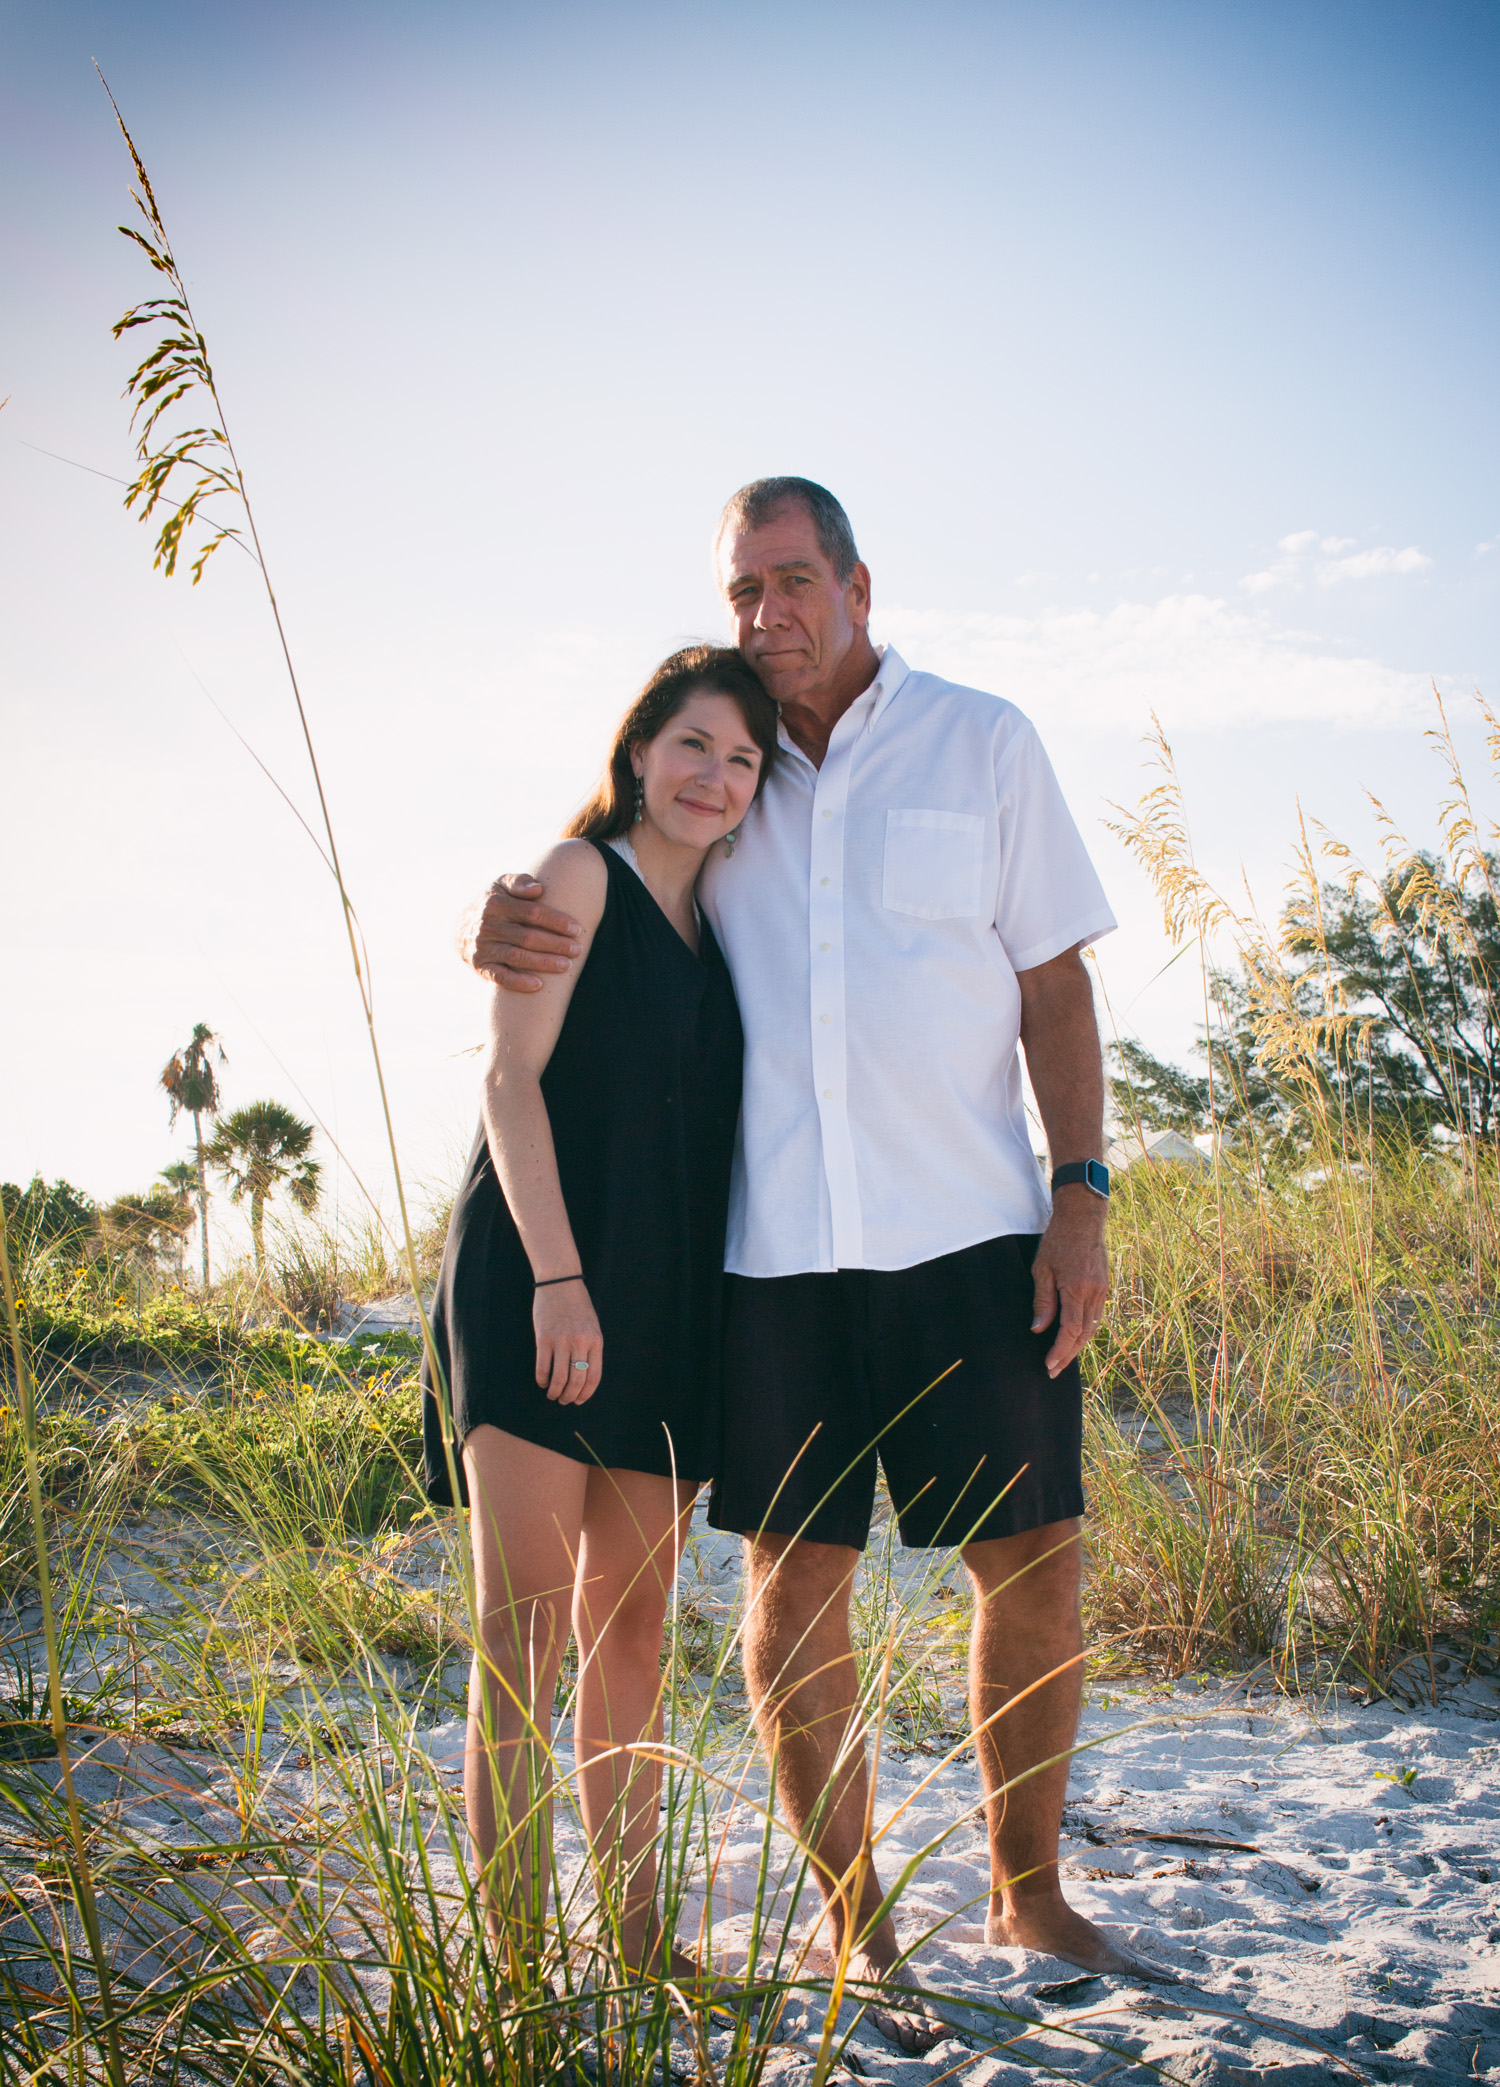 A sweet father and daughter photo amongst the sand and long grass at Pass-a-Grille Beach.